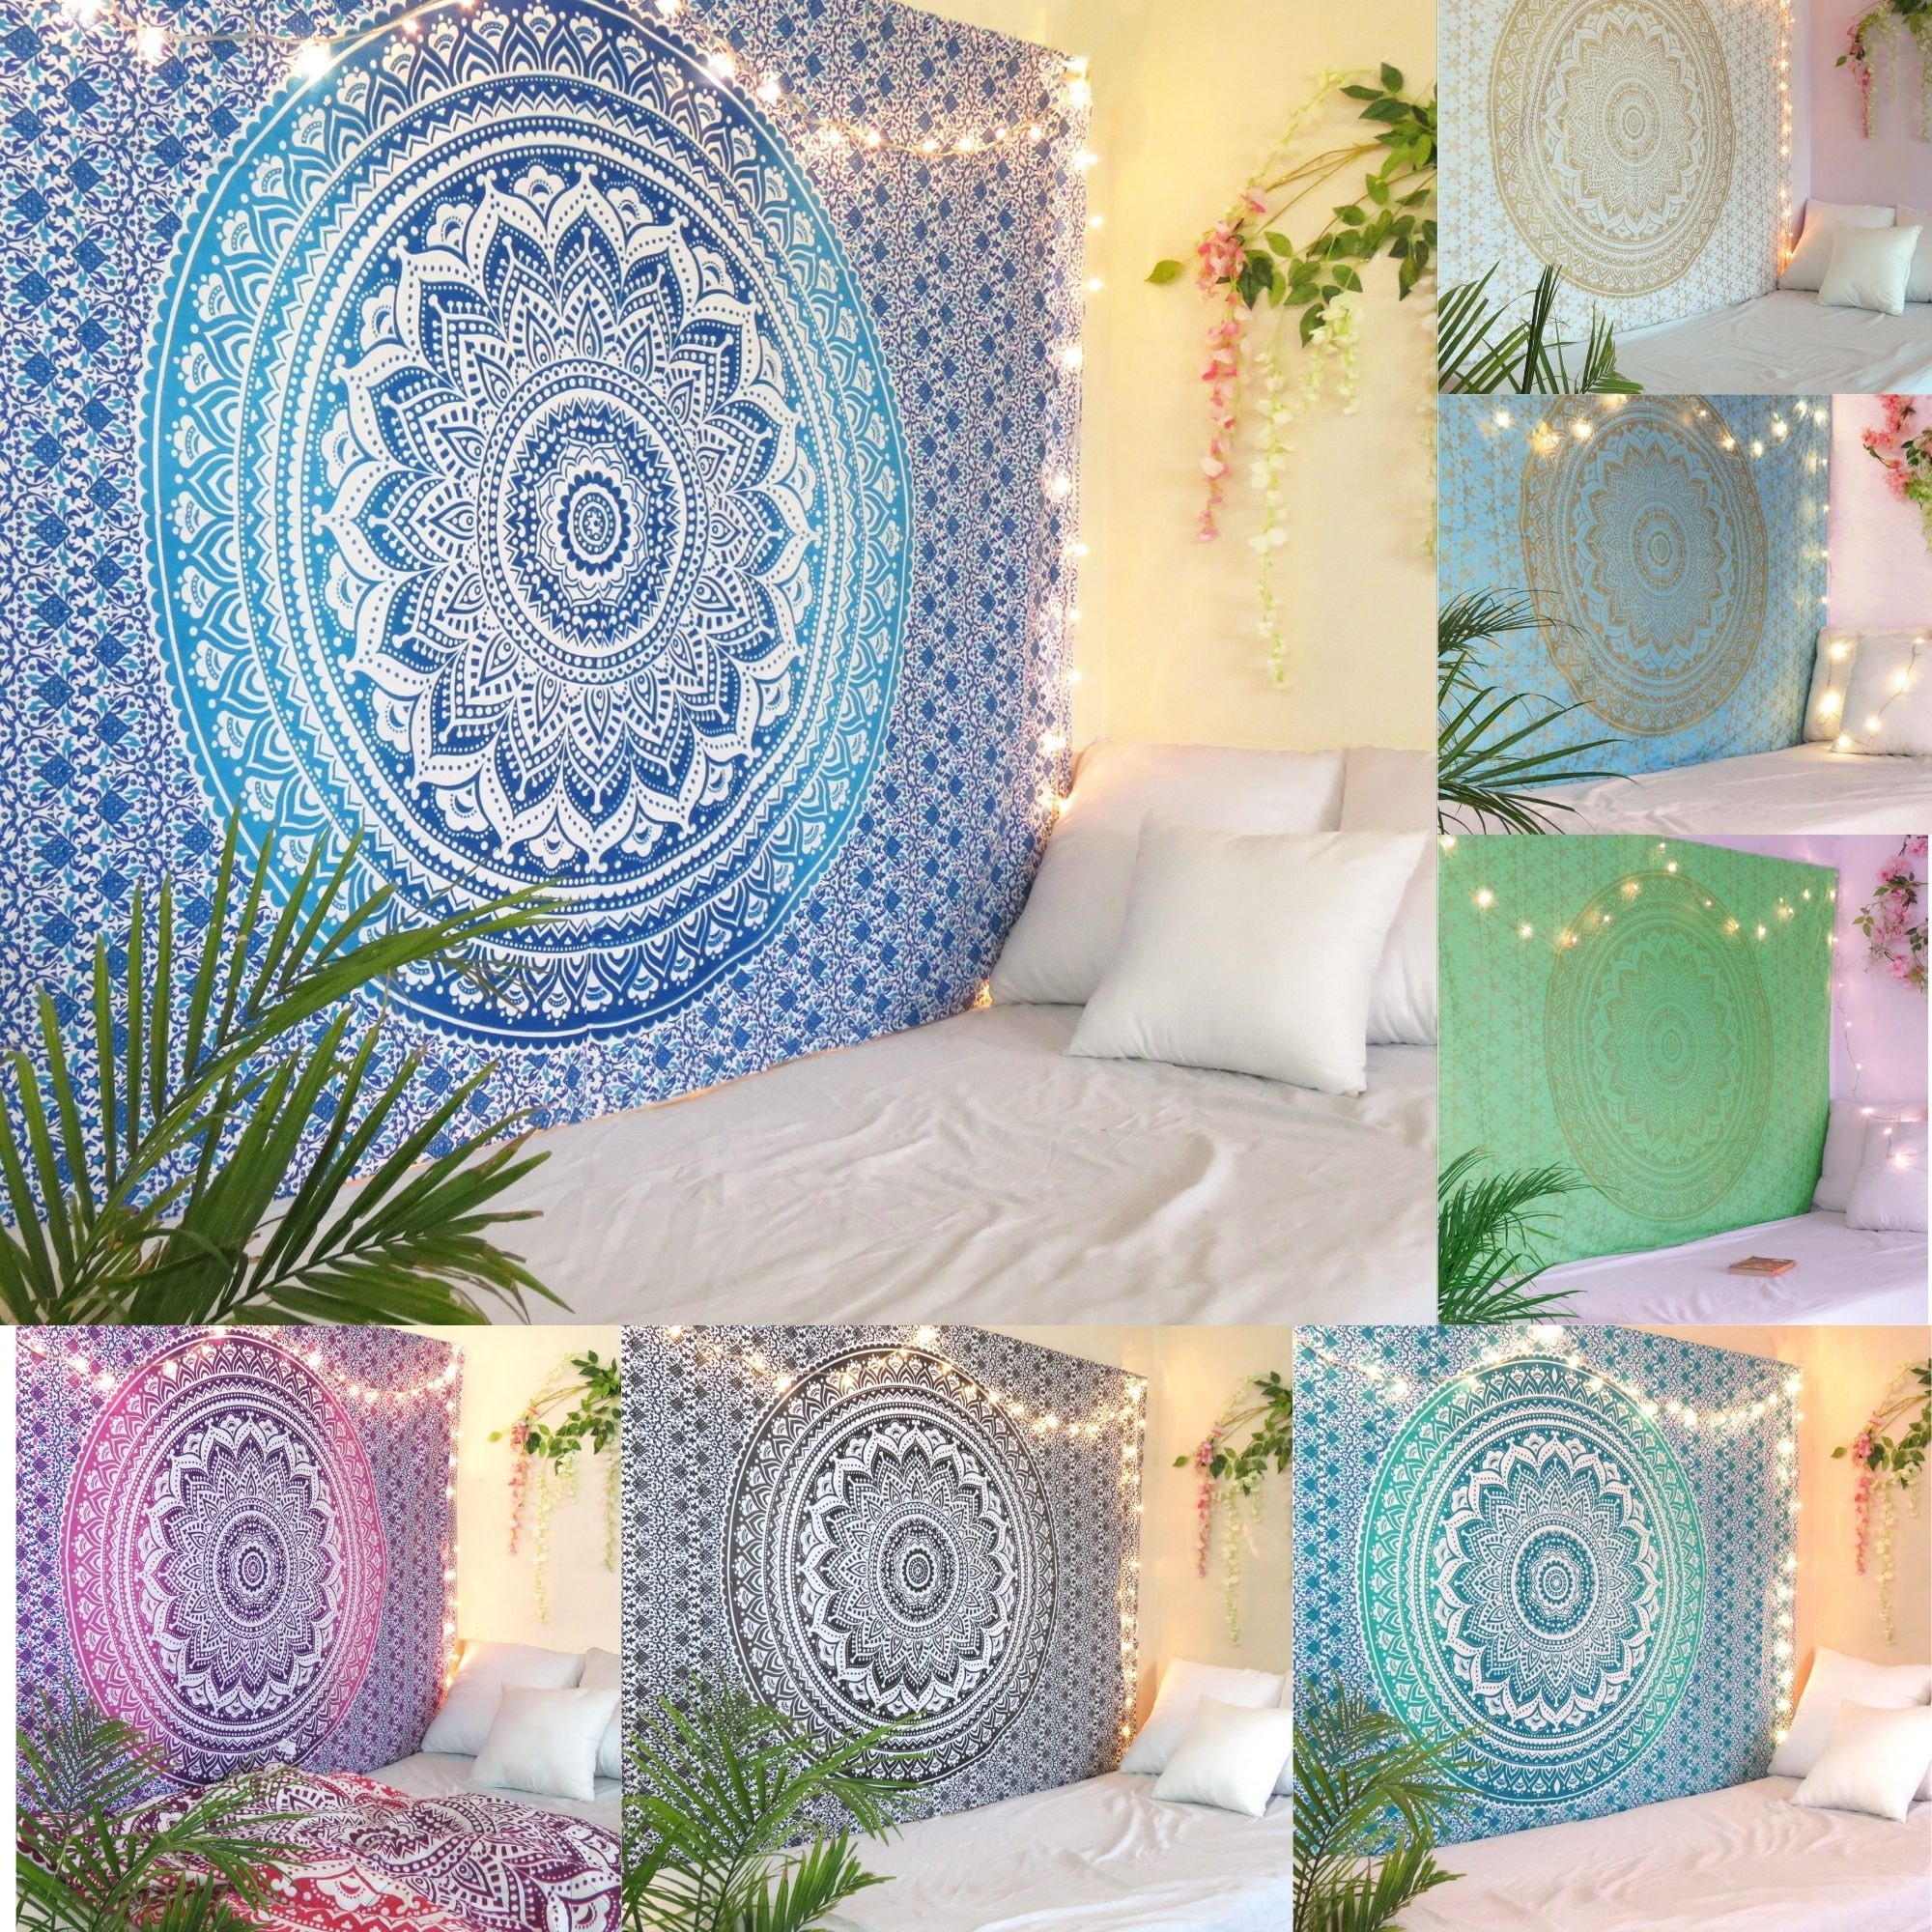 Tapestry Mandala Wall Hanging Boho Cotton Poster Twin Queen Tapestry Home Decor 